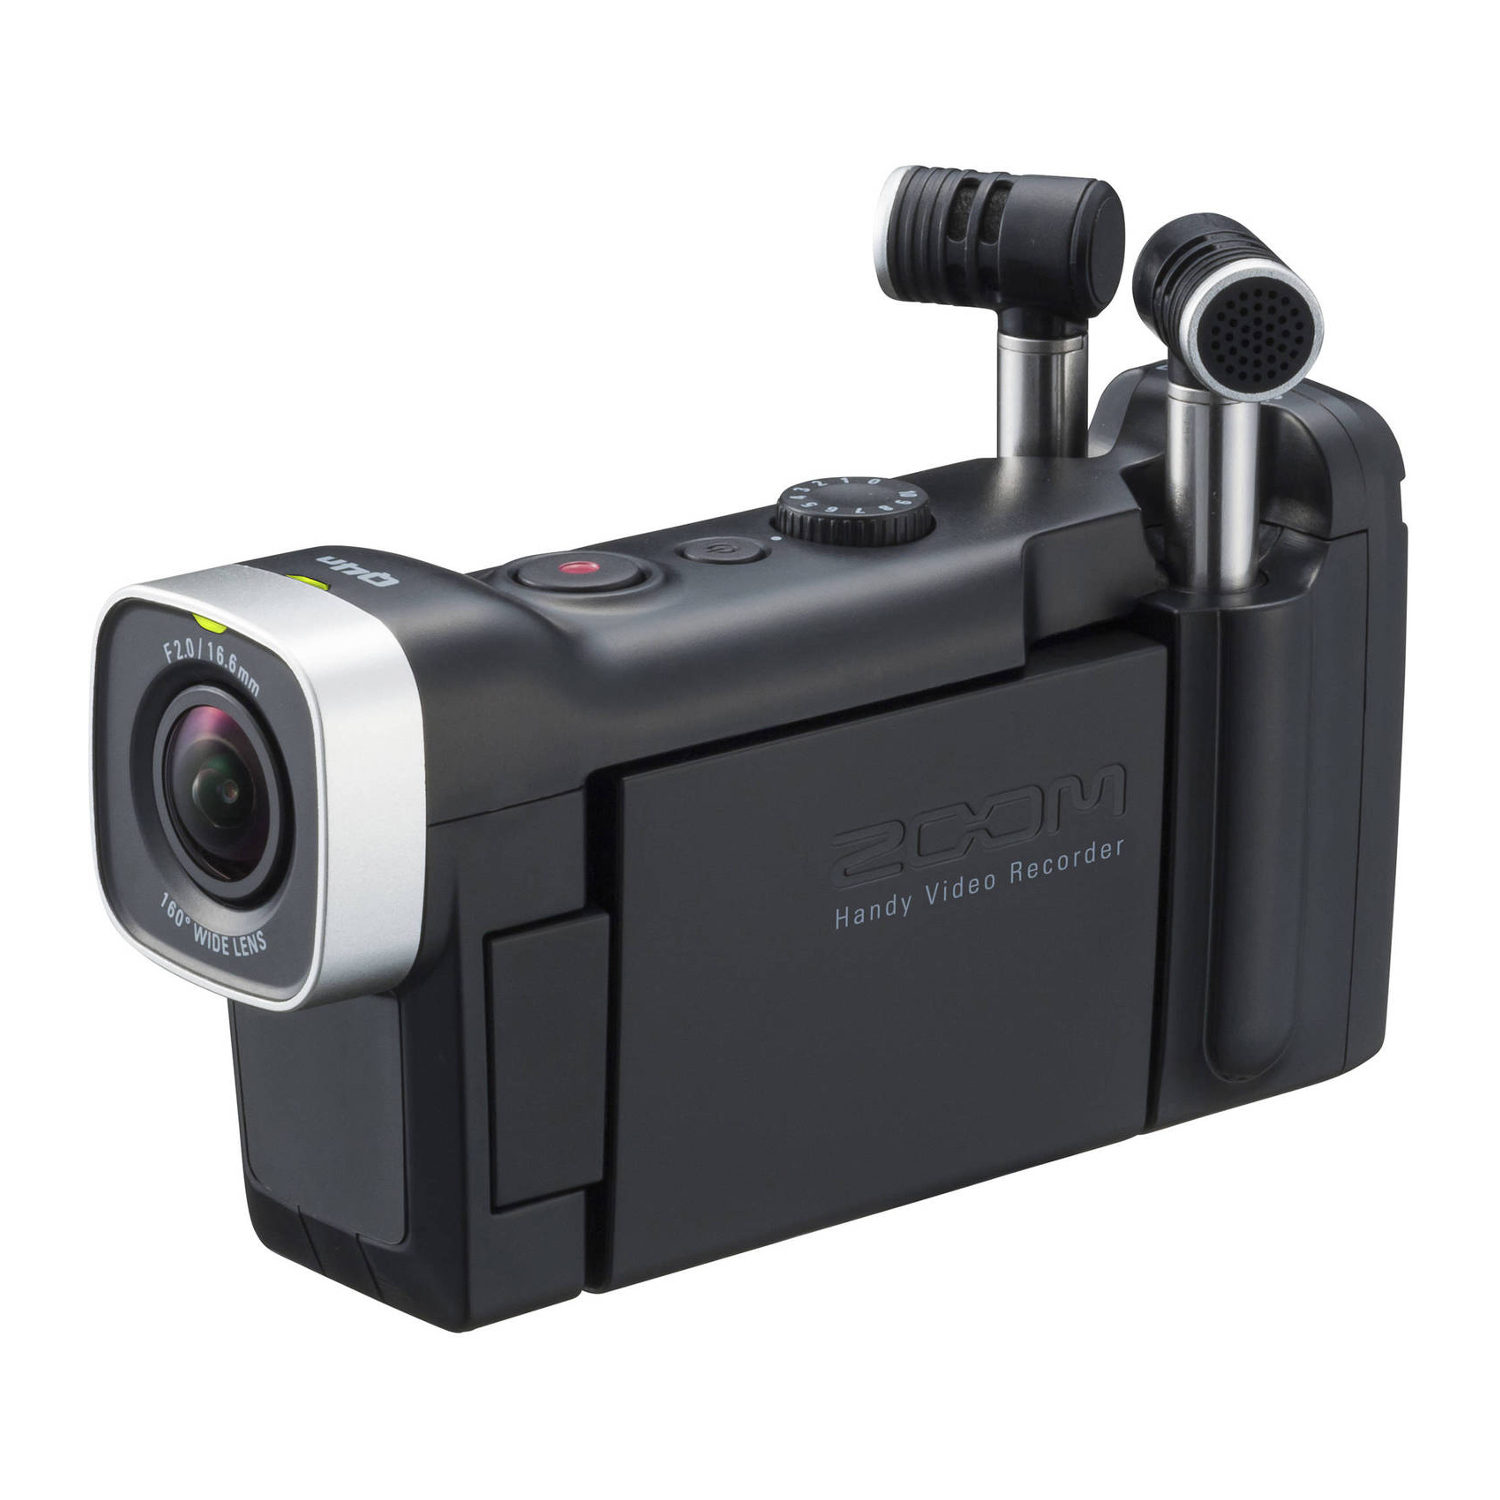 Image of Zoom Q4n Handy Video Recorder